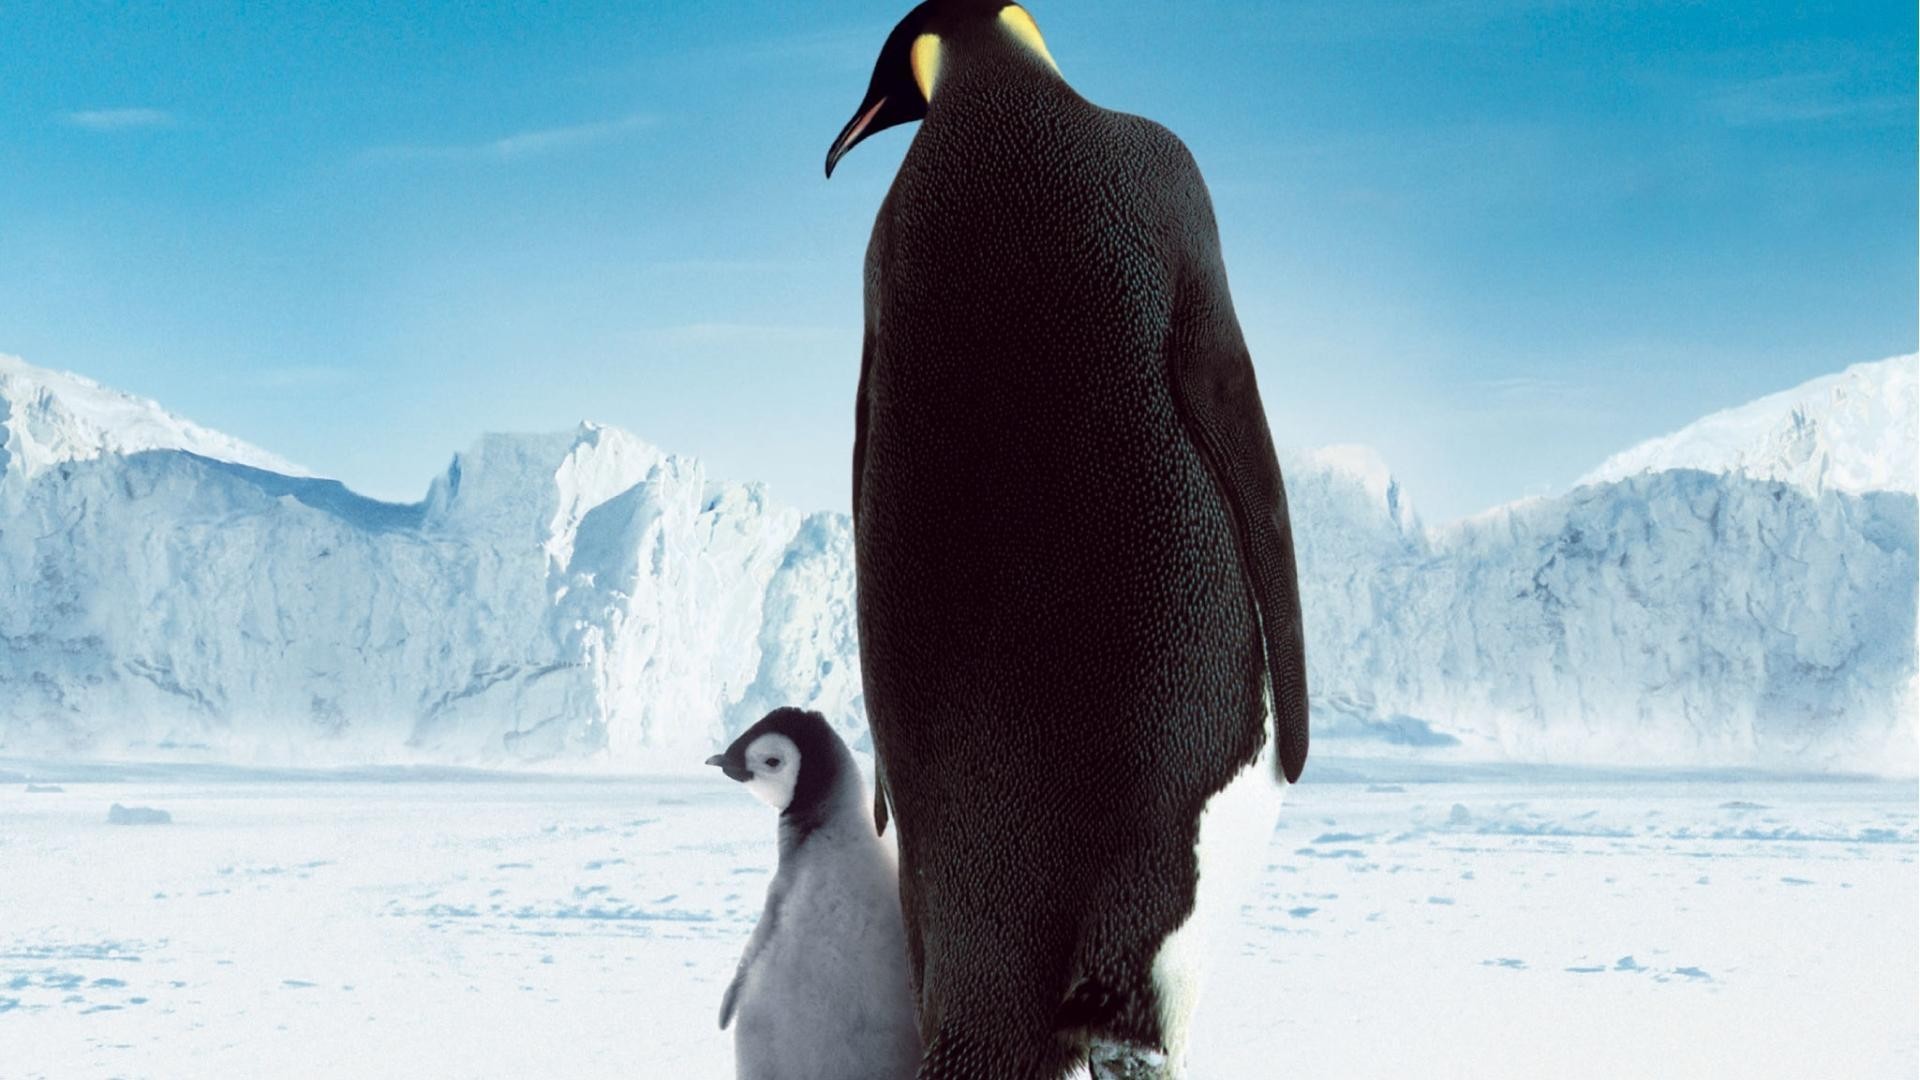 Movie March Of The Penguins HD Wallpaper | Background Image